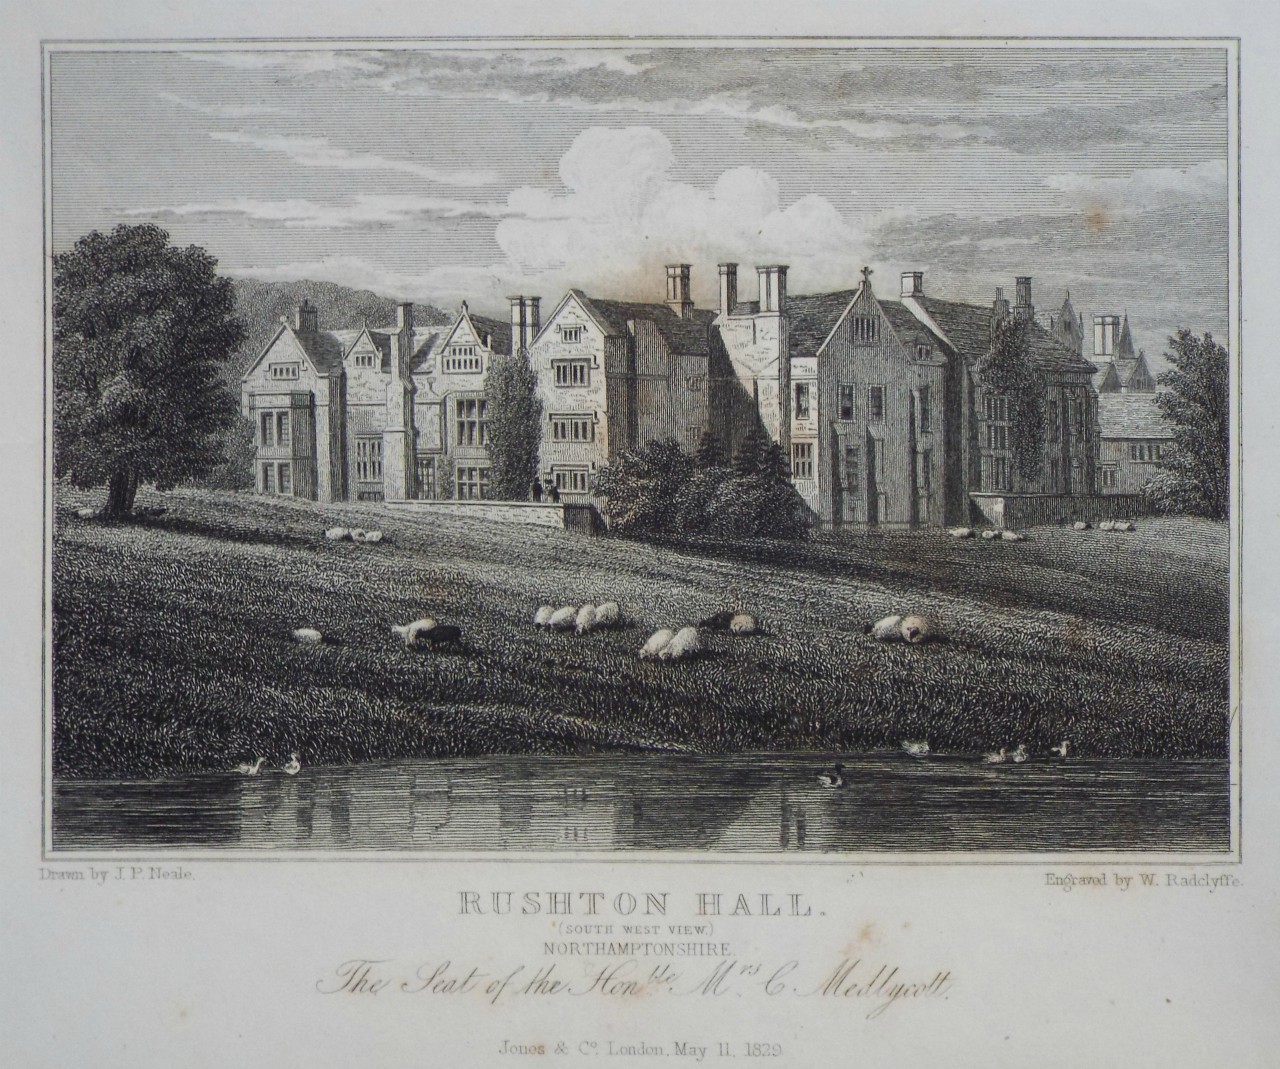 Print - Rushton Hall, (South West Front) Northamptonshire. The Seat of the Honble. Mrs C. Medlycotte. - Radclyffe